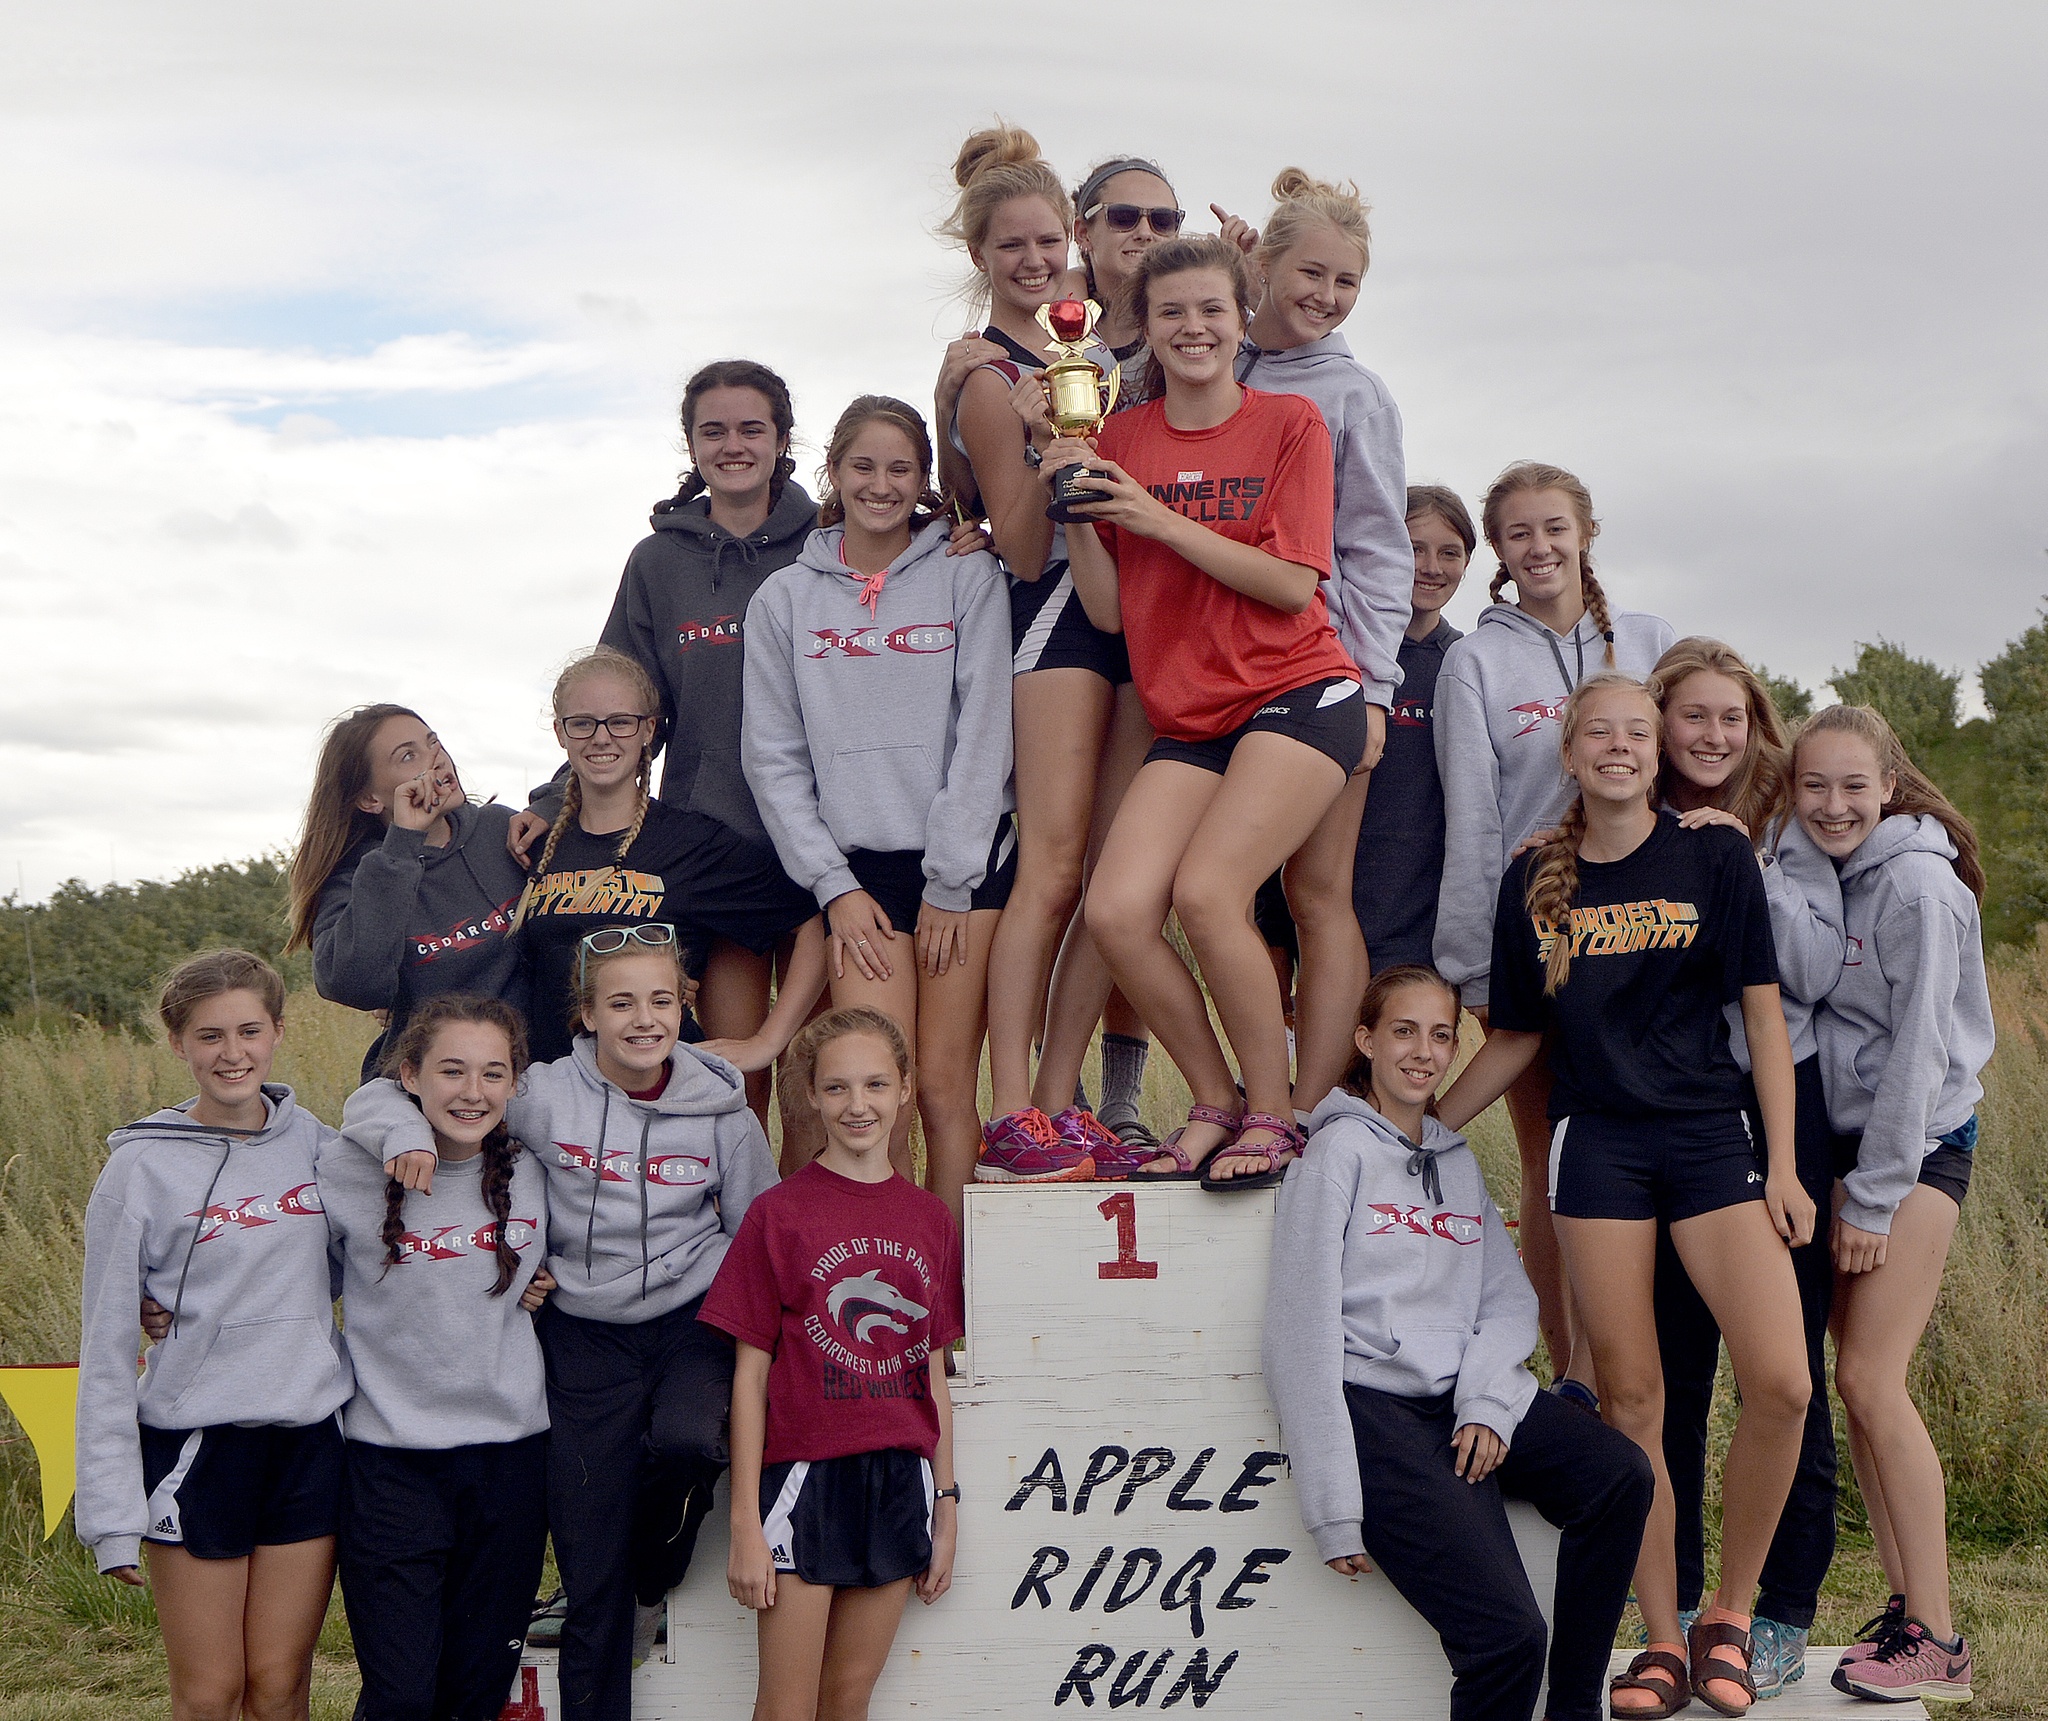 2016 CHS girls cross country team placing first at the Apple Ridge Run Sept. 17. Courtesy photo